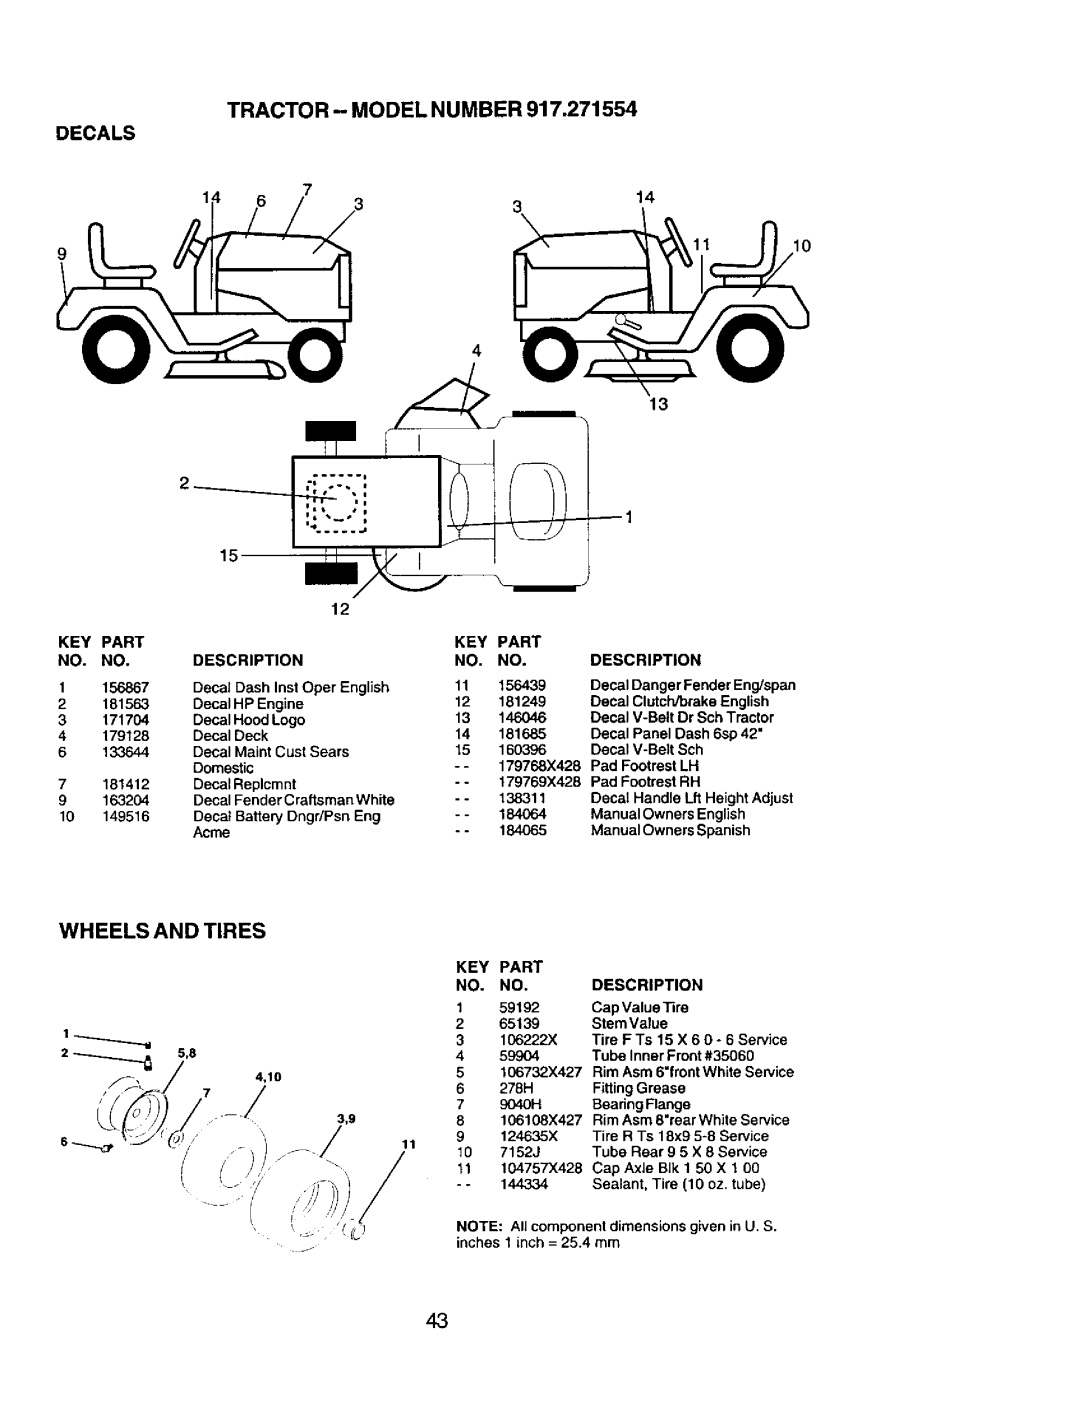 Craftsman 917.271554 owner manual Tractor - Model Number Decals, Wheels And Tires, 7 15 12, 14 1110 13, Description 